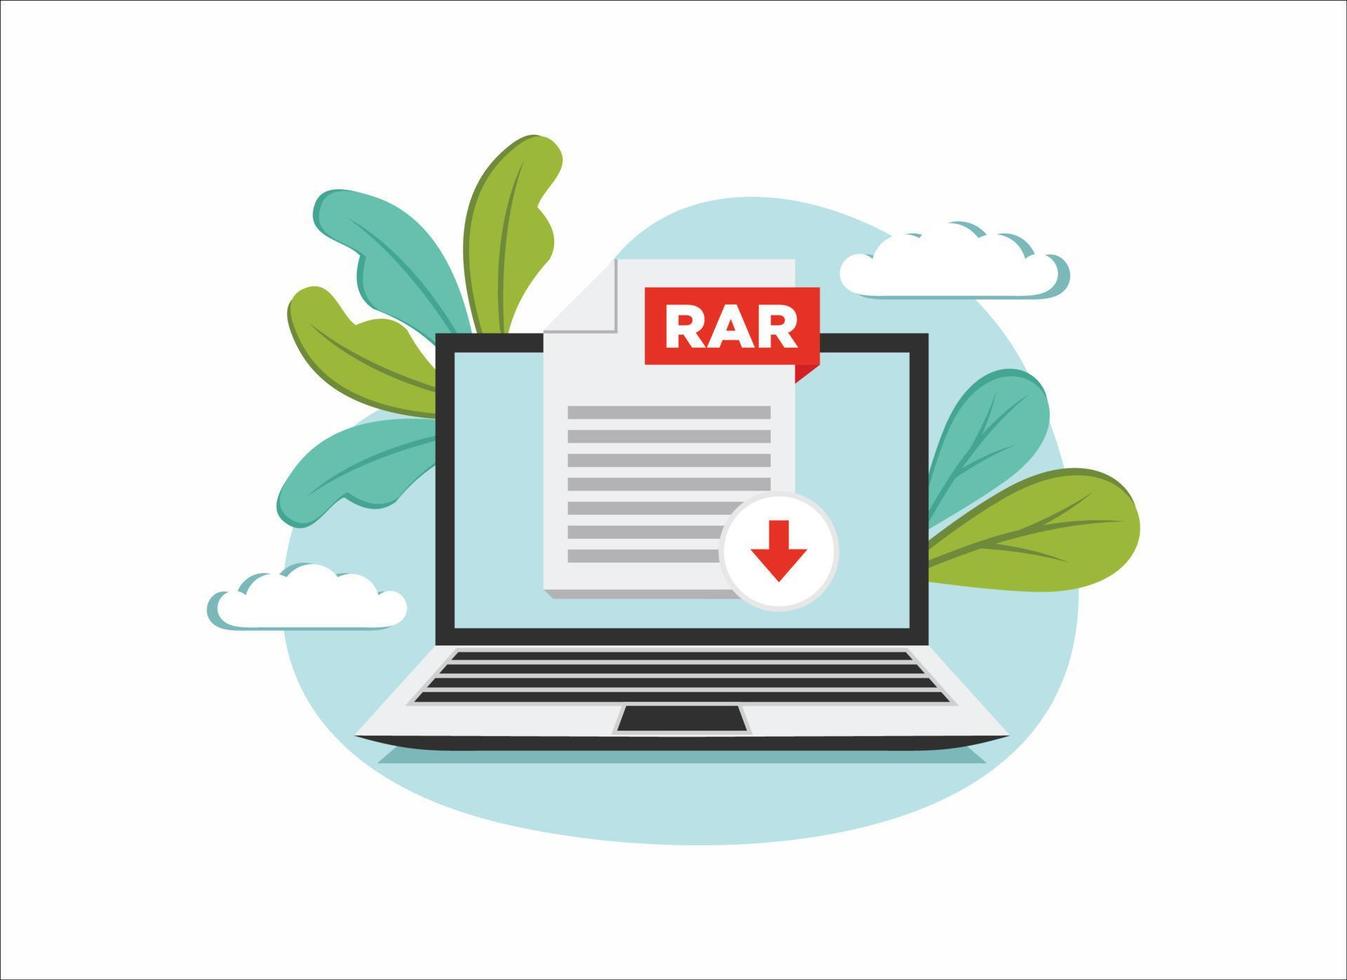 Download RAR icon file with label on laptop screen. Downloading document concept vector